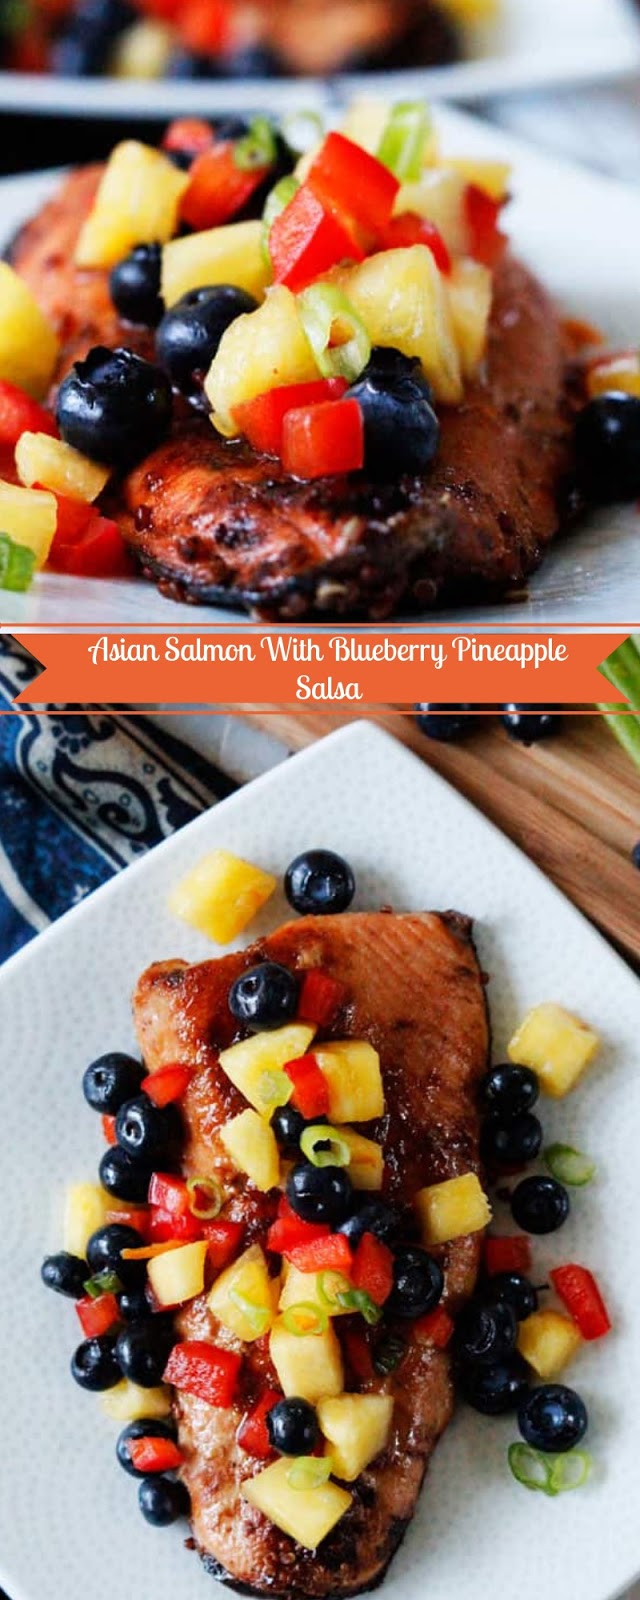 Asian Salmon With Blueberry Pineapple Salsa 